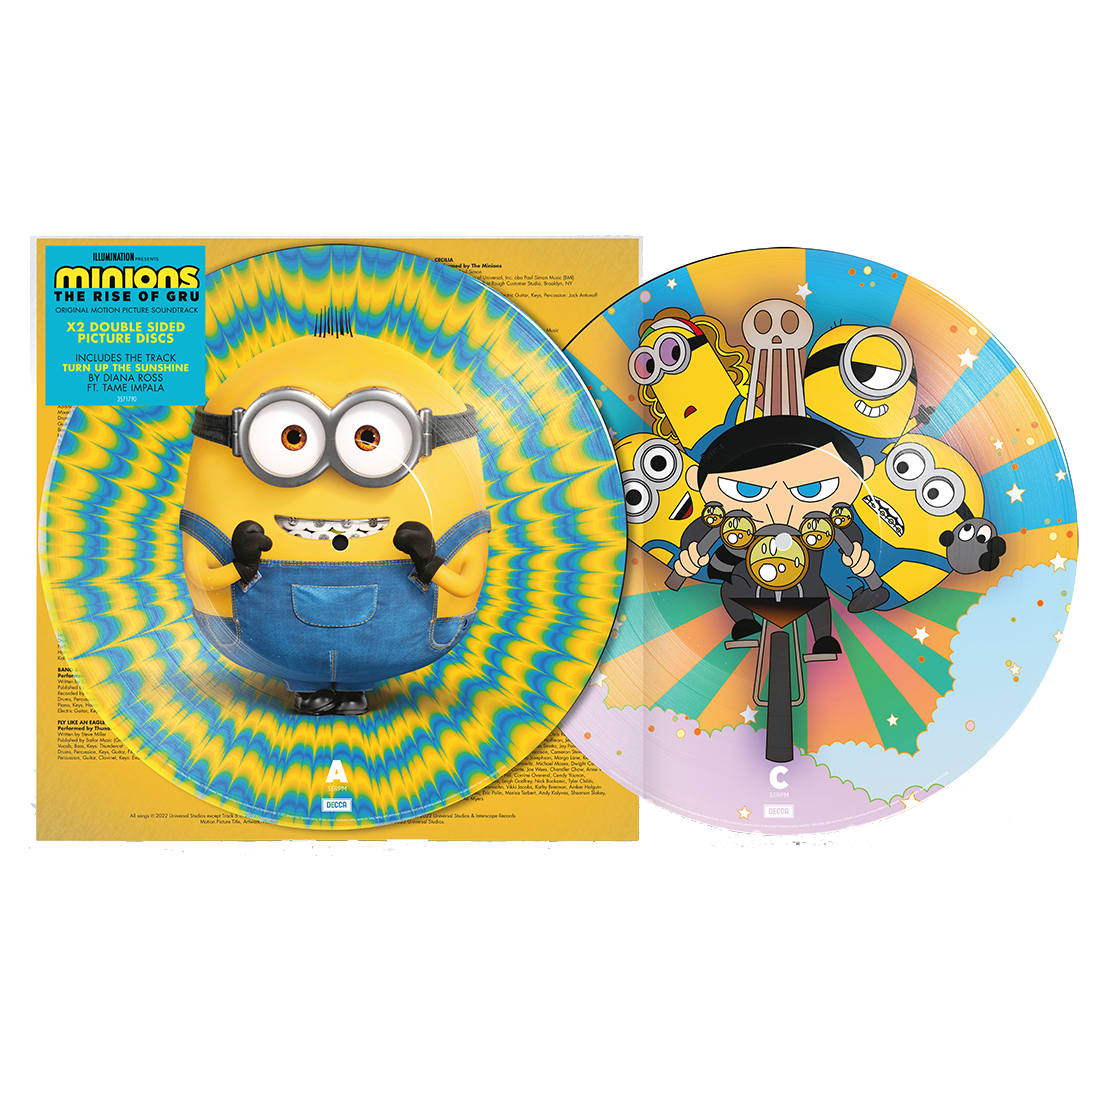 Various Artists - Minions - The Rise Of Gru: Limited Picture Disc Vinyl LP